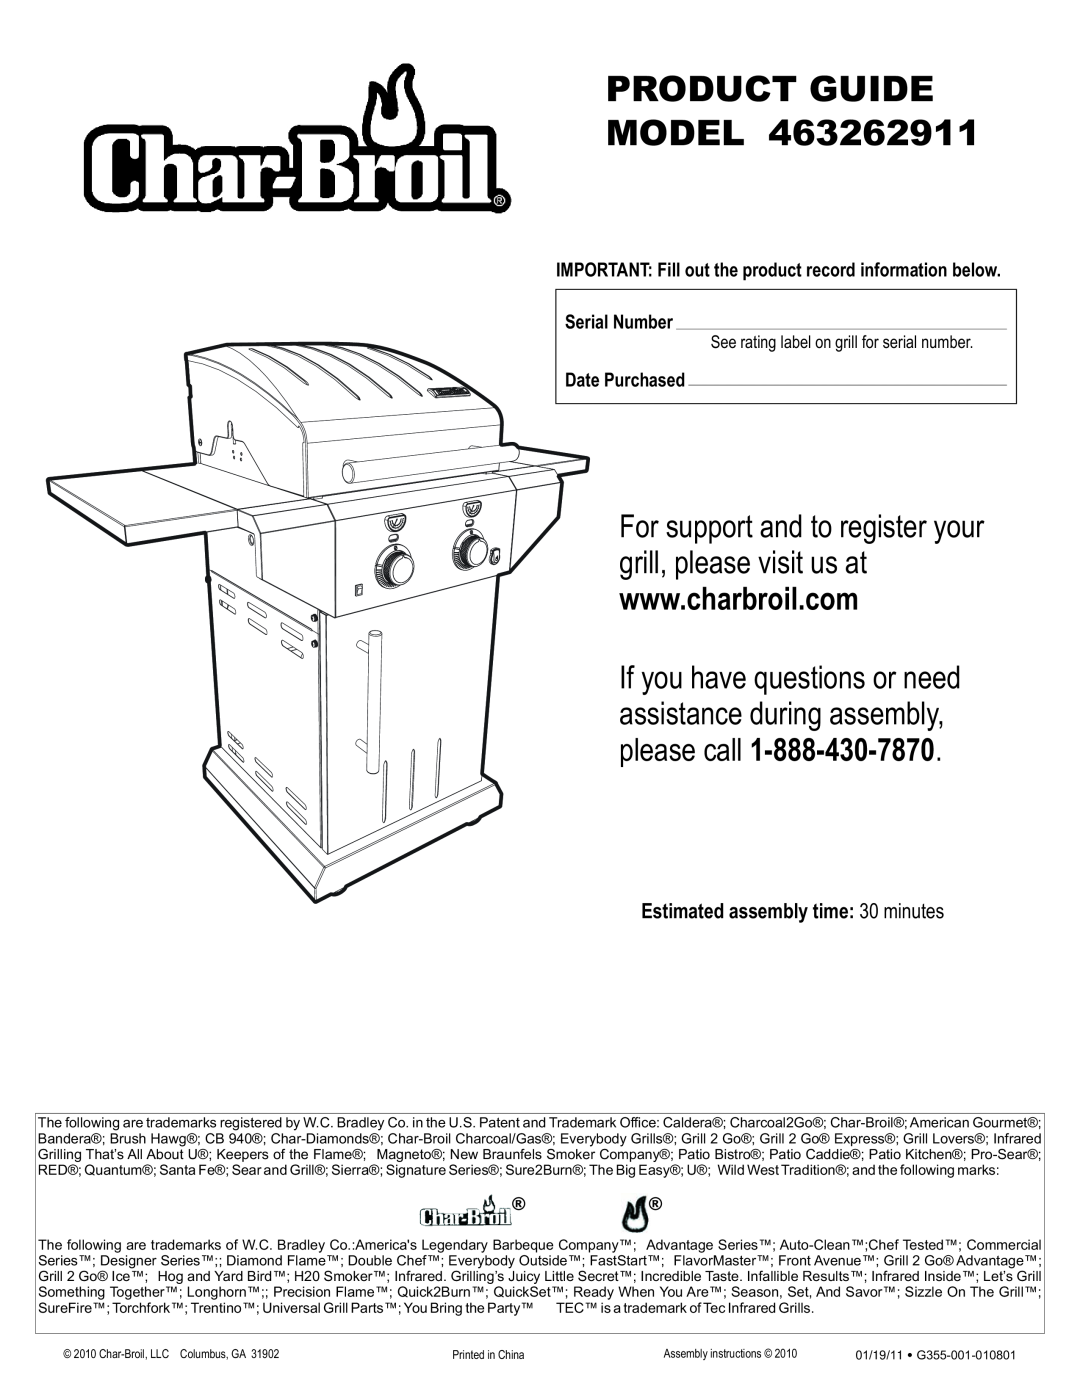 Char-Broil 463262911 manual please call, Estimated assembly time 30 minutes, Product Guide Model, Serial Number 